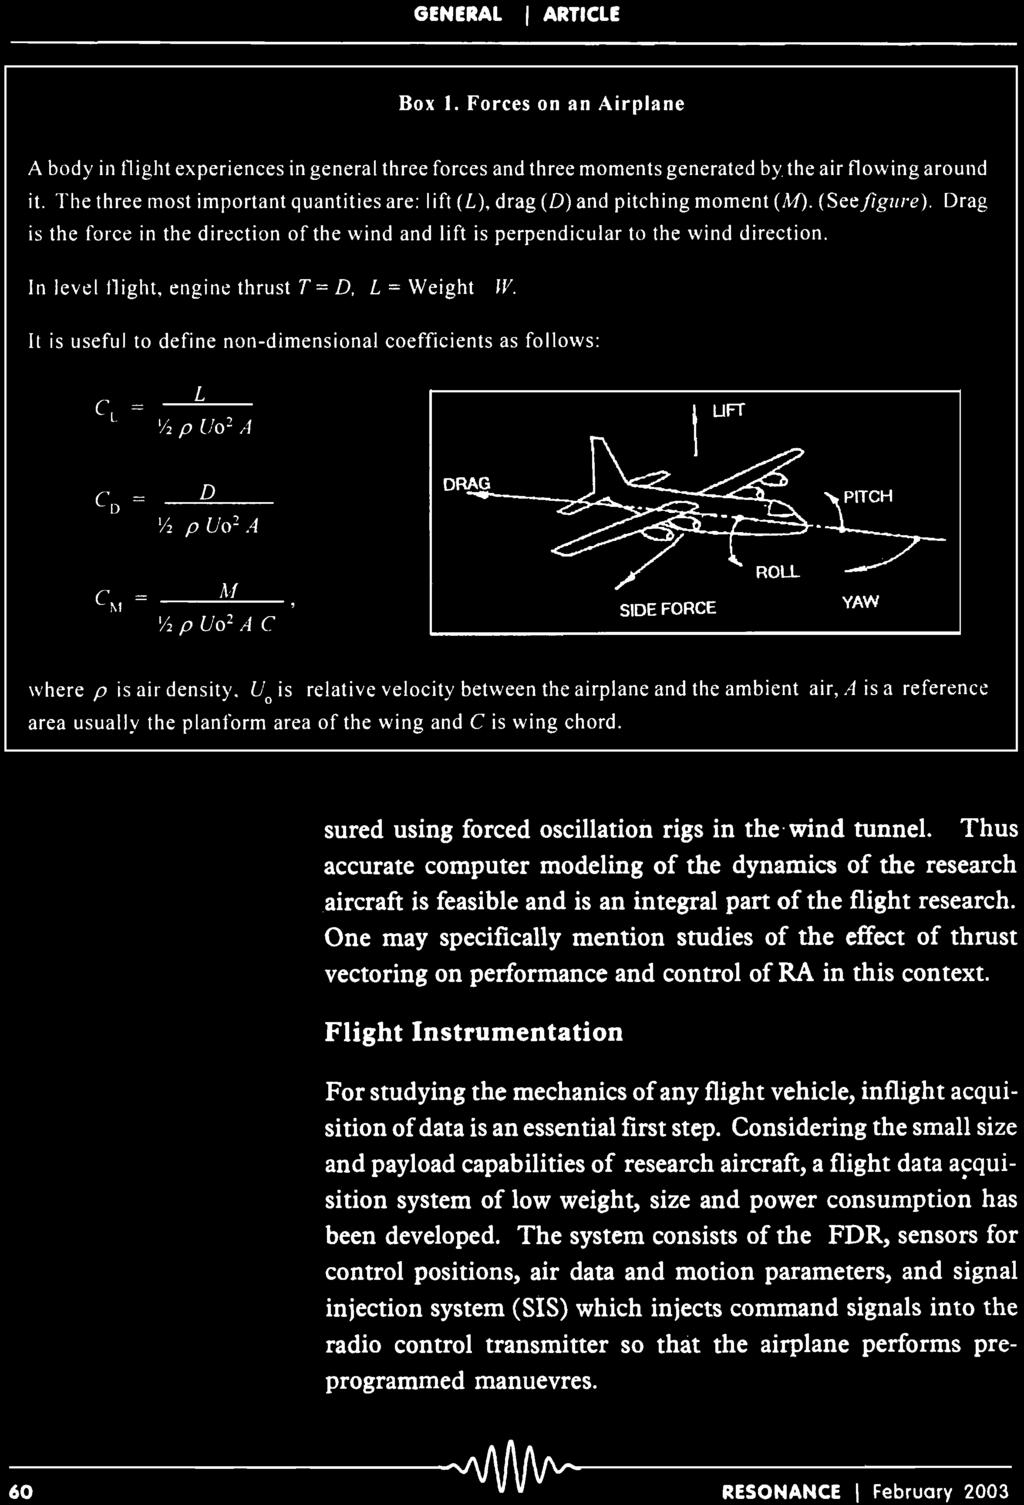 In level flight, engine thrust T = D. L = Weight W. It is useful to define non-dimensional coefficients as follows: L C = L '12 P U02 A \ UFT DRAG D CD --- 12 P V0 2 A 7 M Cr-.I 12 P U02 A C.